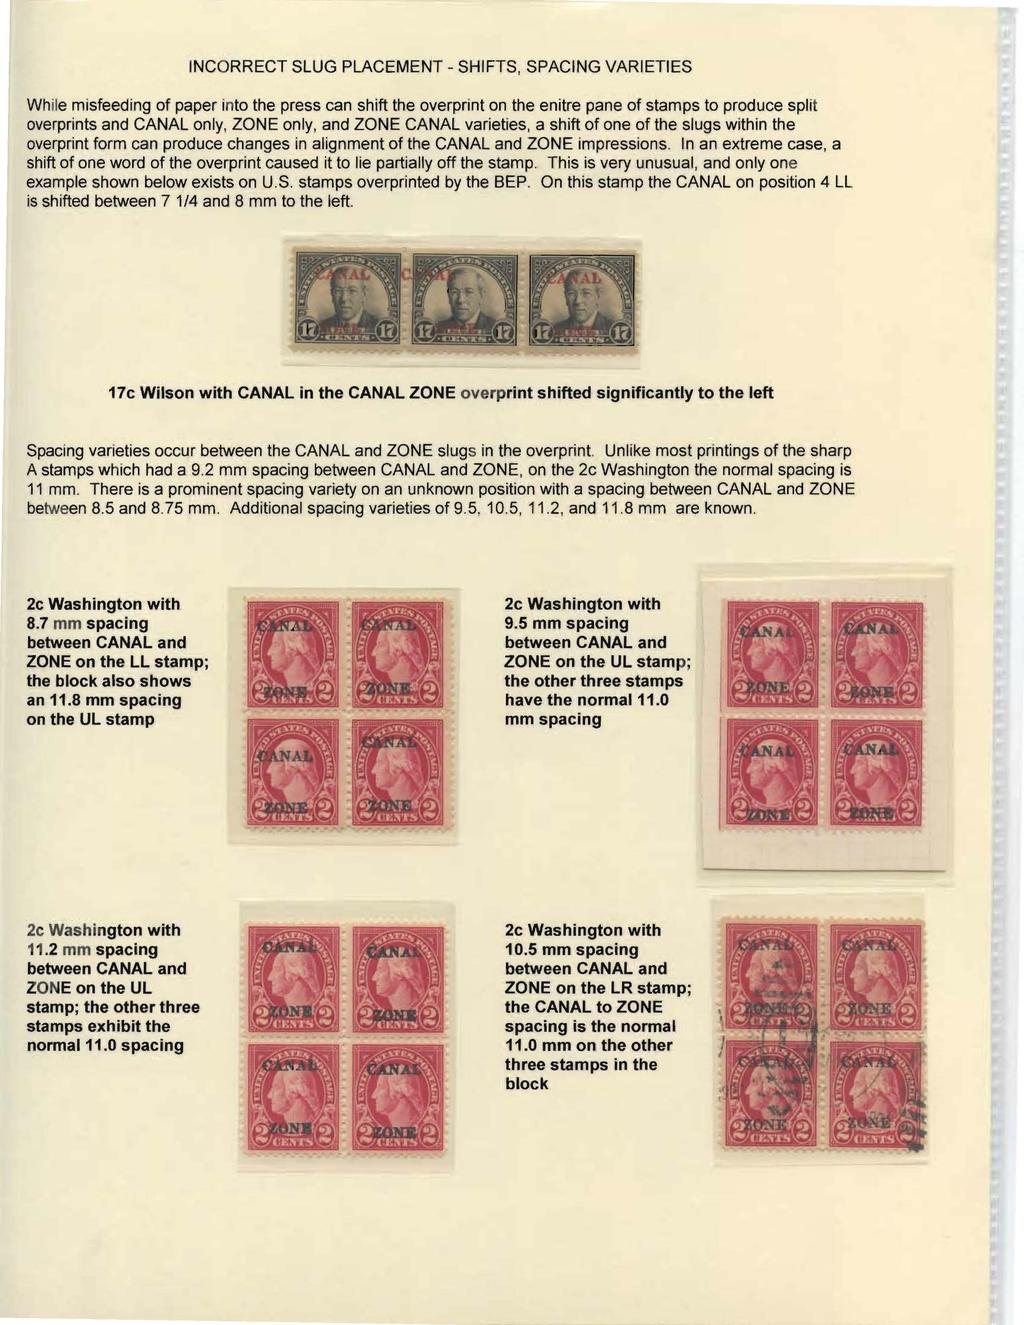 INCORRECT SLUG PLACEMENT - SHIFTS, SPACING VARIETIES While misfeeding of paper into the press can shift the overprint on the enitre pane of stamps to produce split overprints and CANAL only, ZONE